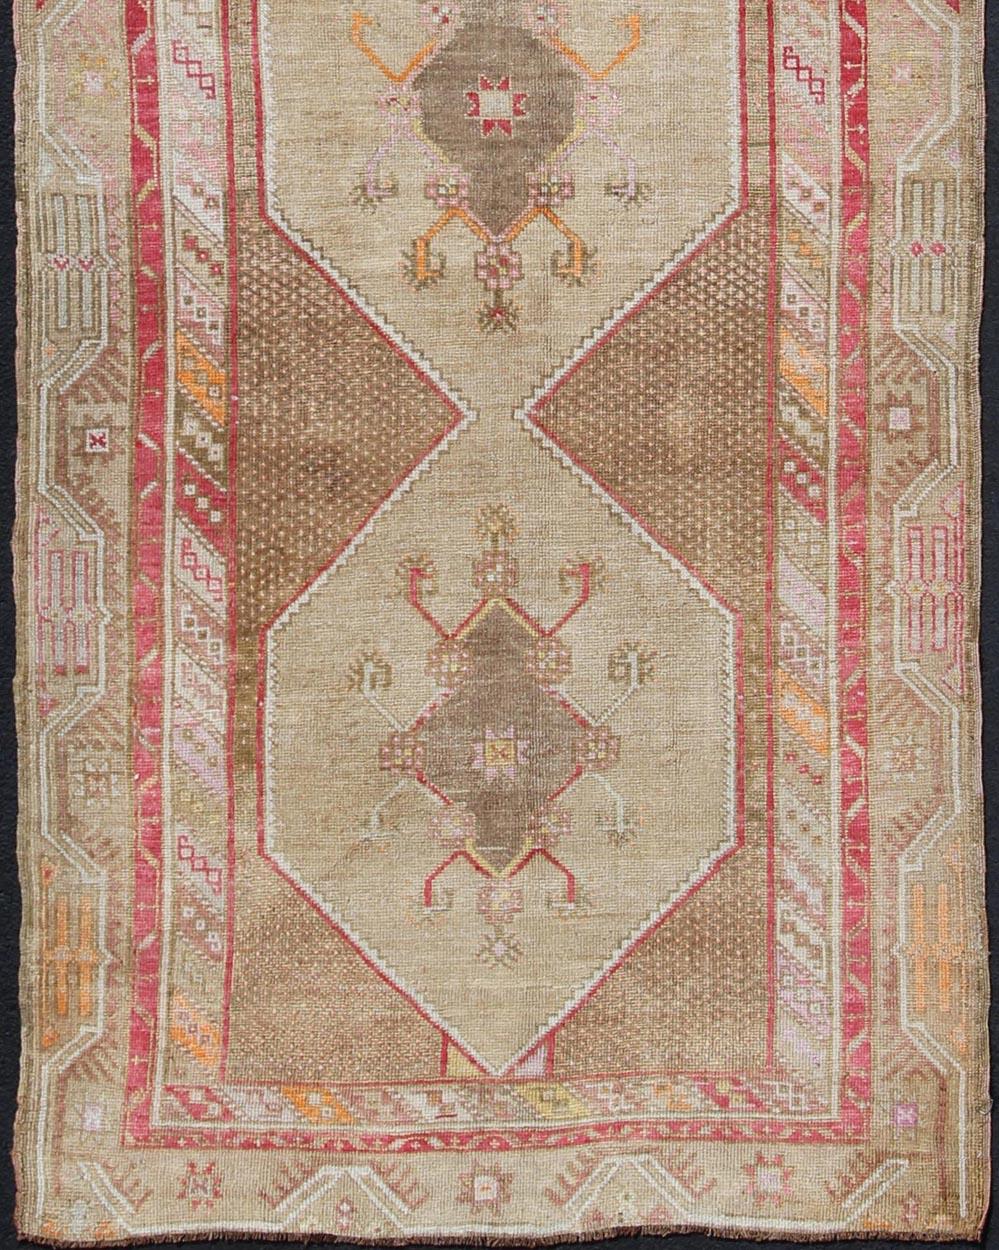 Vintage Oushak carpet with Tribal Medallion Design, rug TU-MTU-4820, country of origin / type: Turkey / Oushak, circa 1940

This vintage Oushak carpet from mid-20th century Turkey features a repeating tribal medallion design rendered in earth